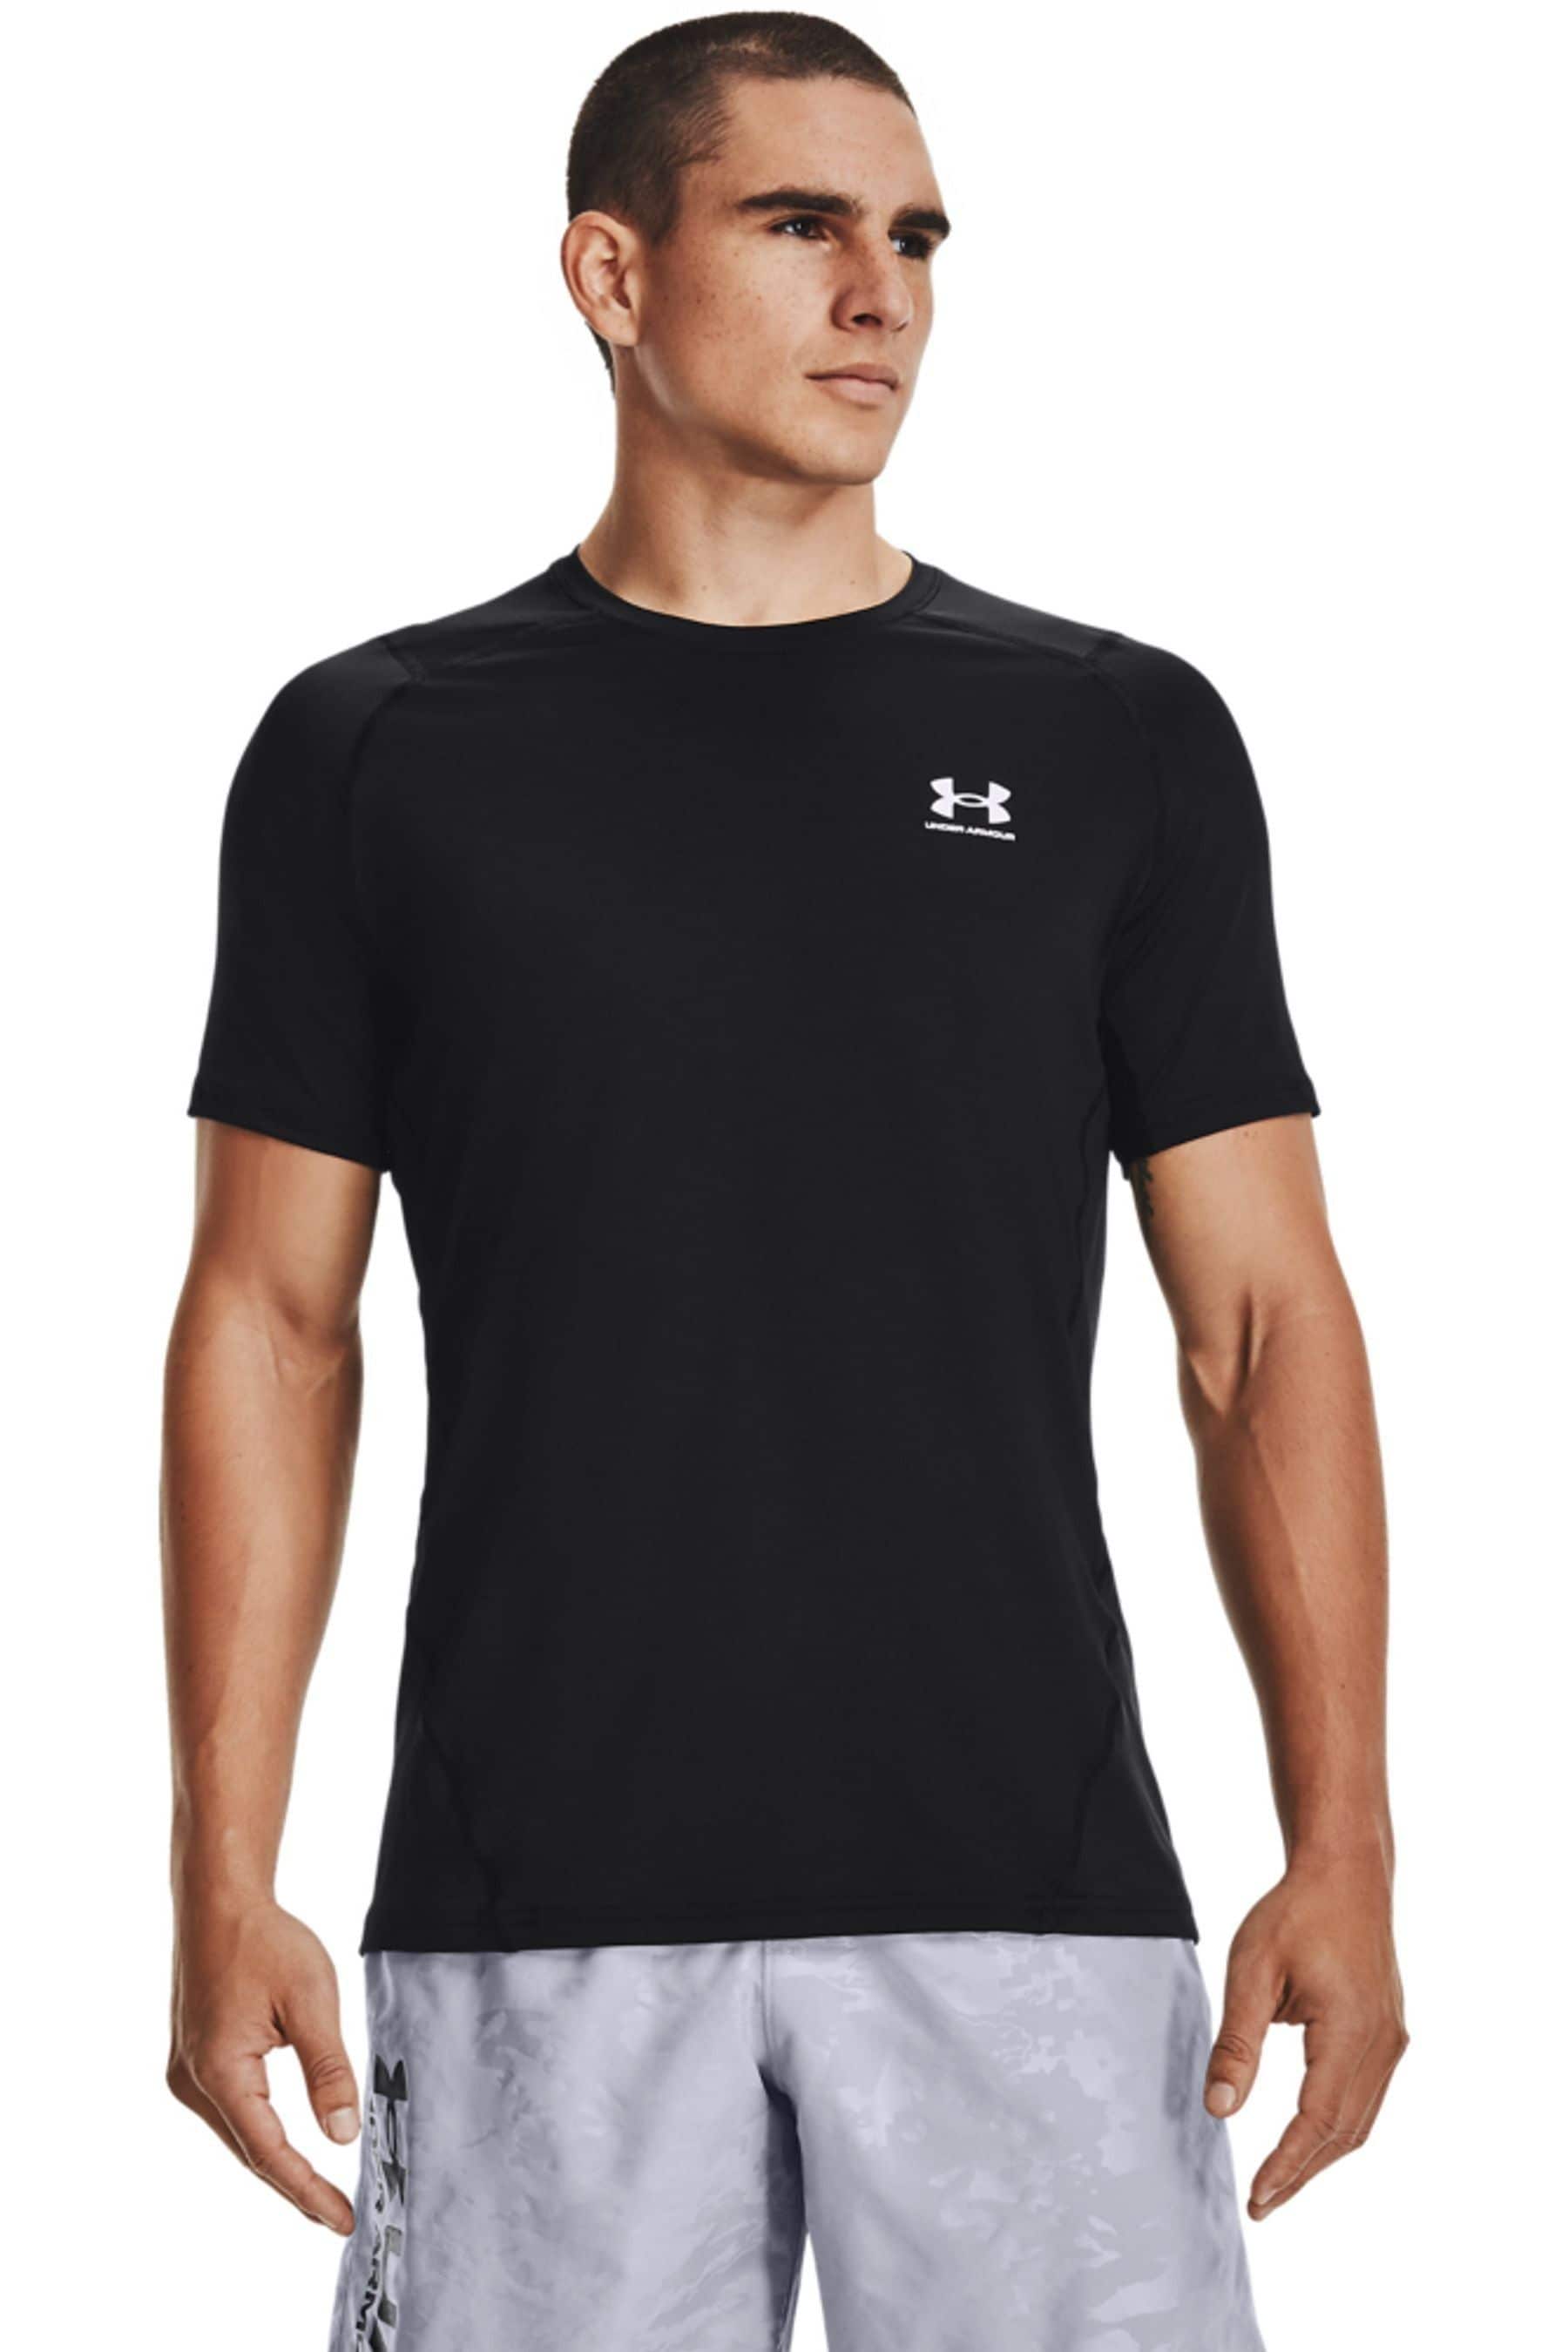 Buy Under Armour Heat Gear Fitted T-Shirt from the Next UK online shop